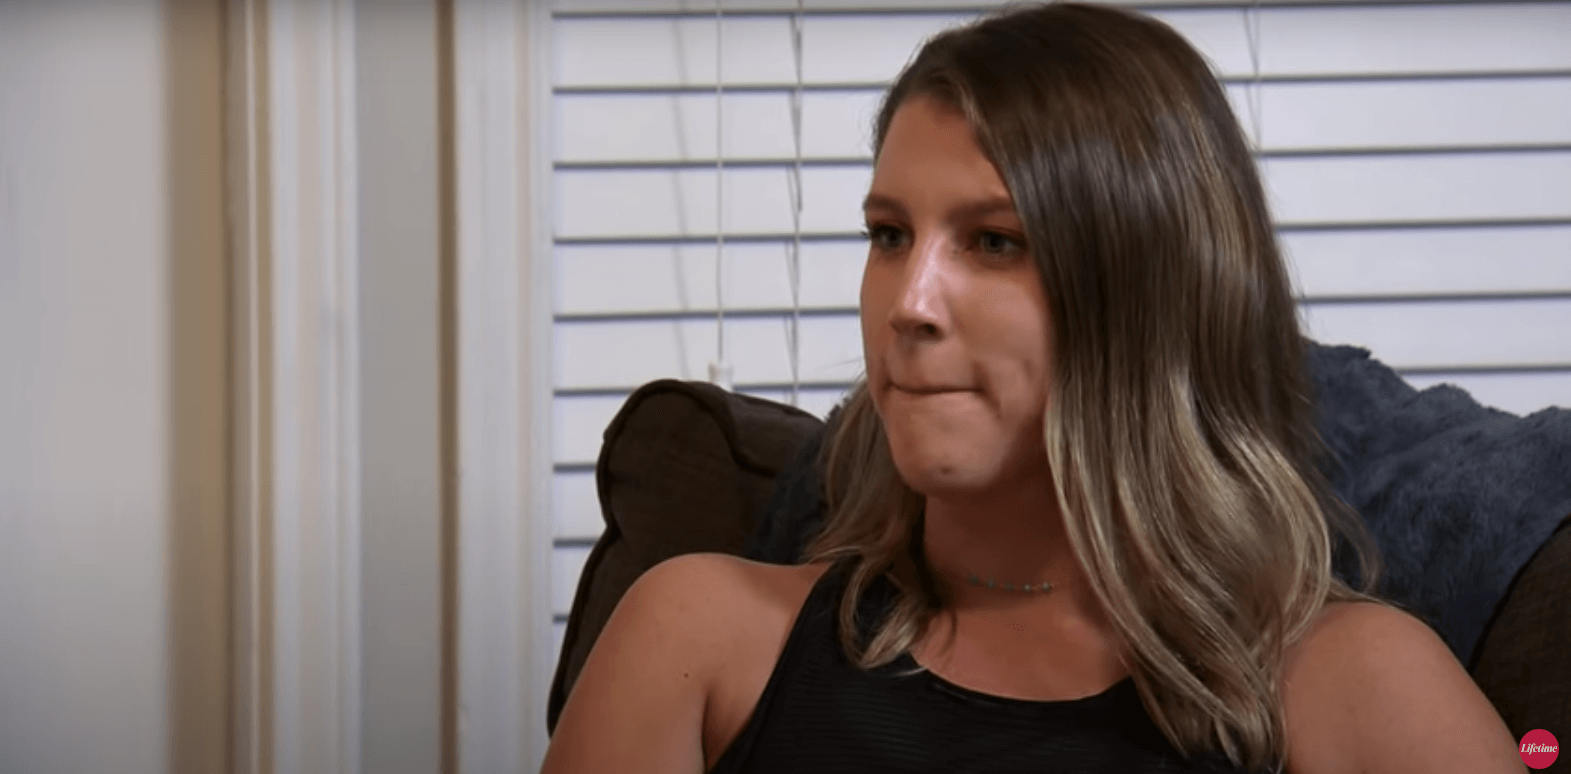 Haley from 'Married at First Sight' Season 12 pursing her lips